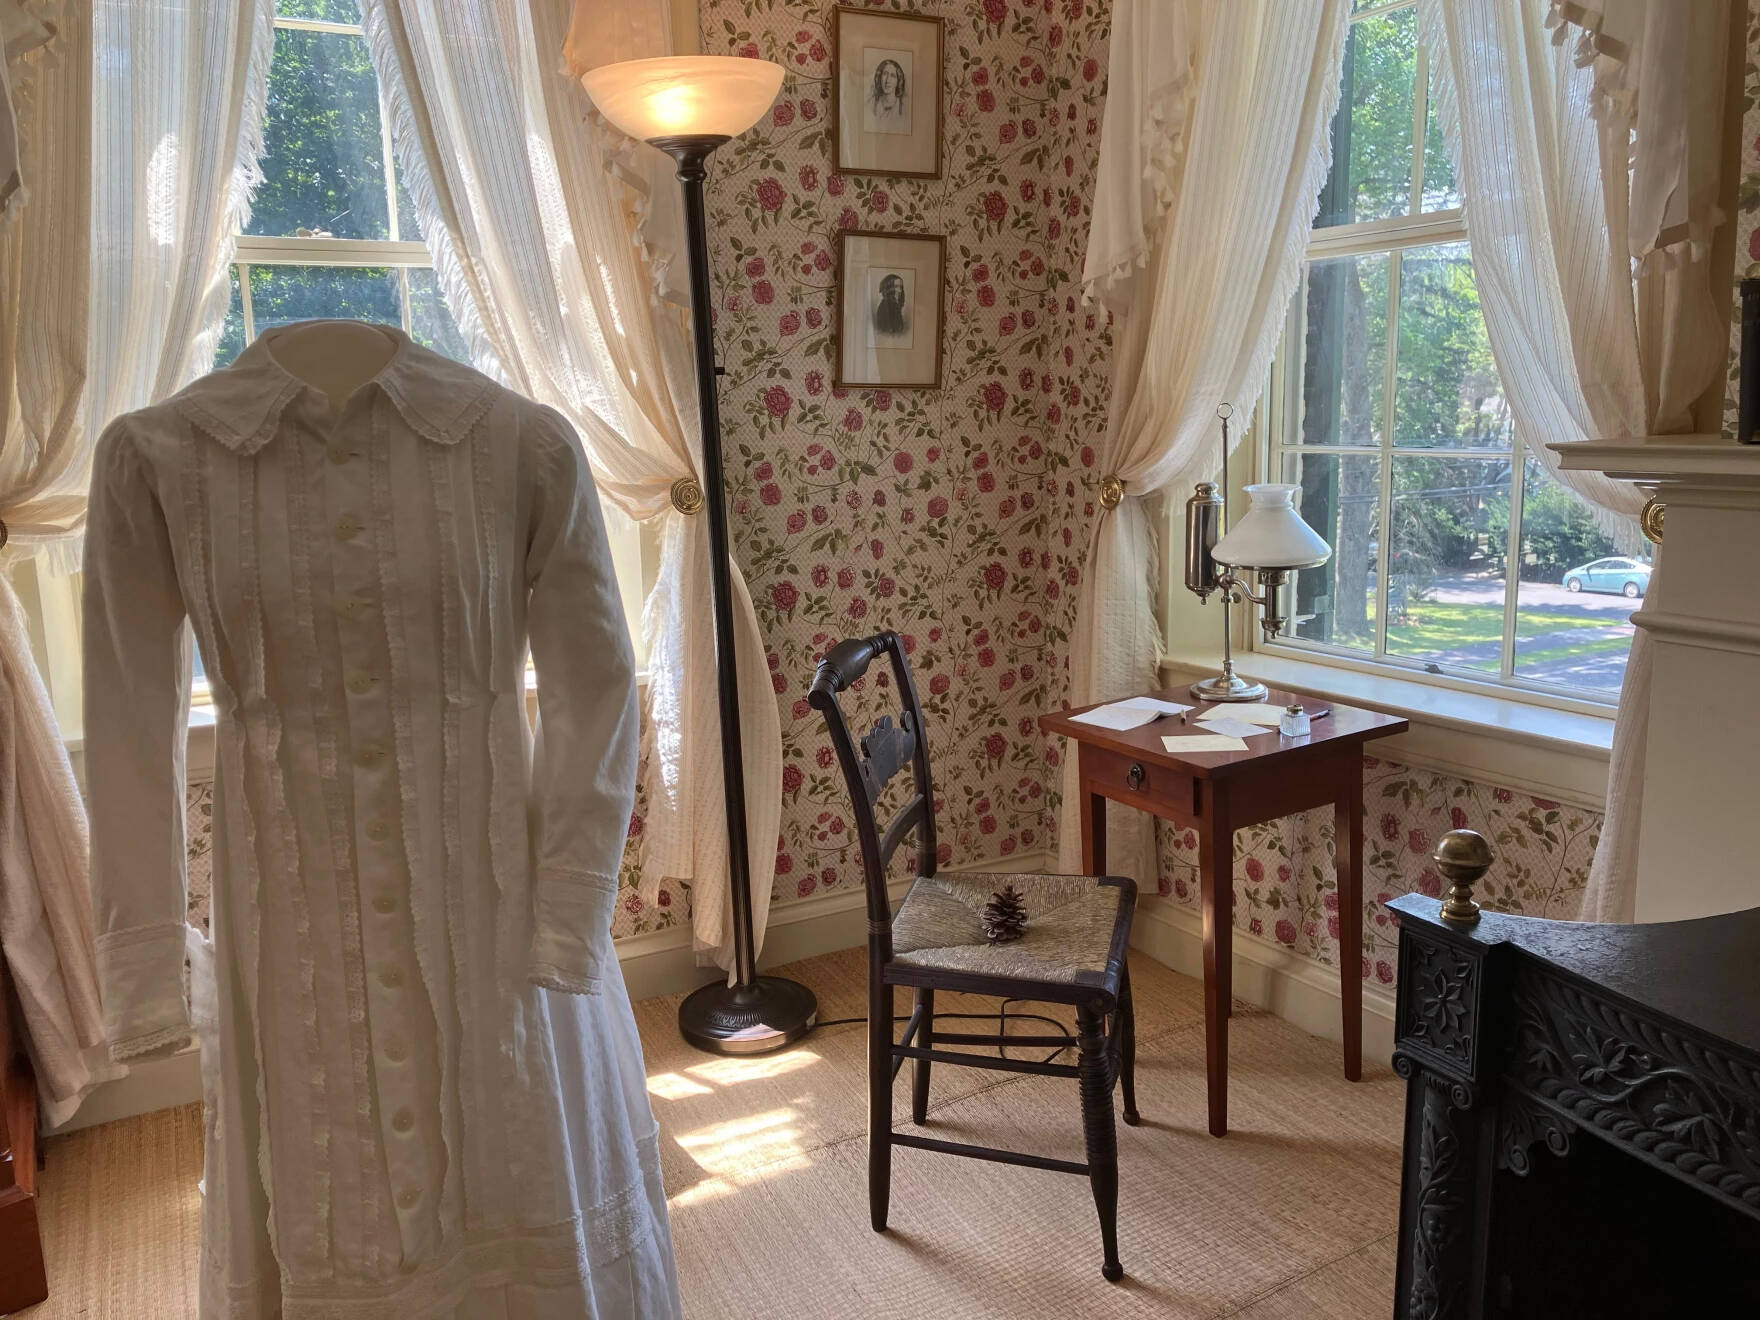 A room inside the Emily Dickinson Museum in Amherst, Massachusetts, where Dickinson wrote poems and letters (Nancy Eve Cohen/NEPM)